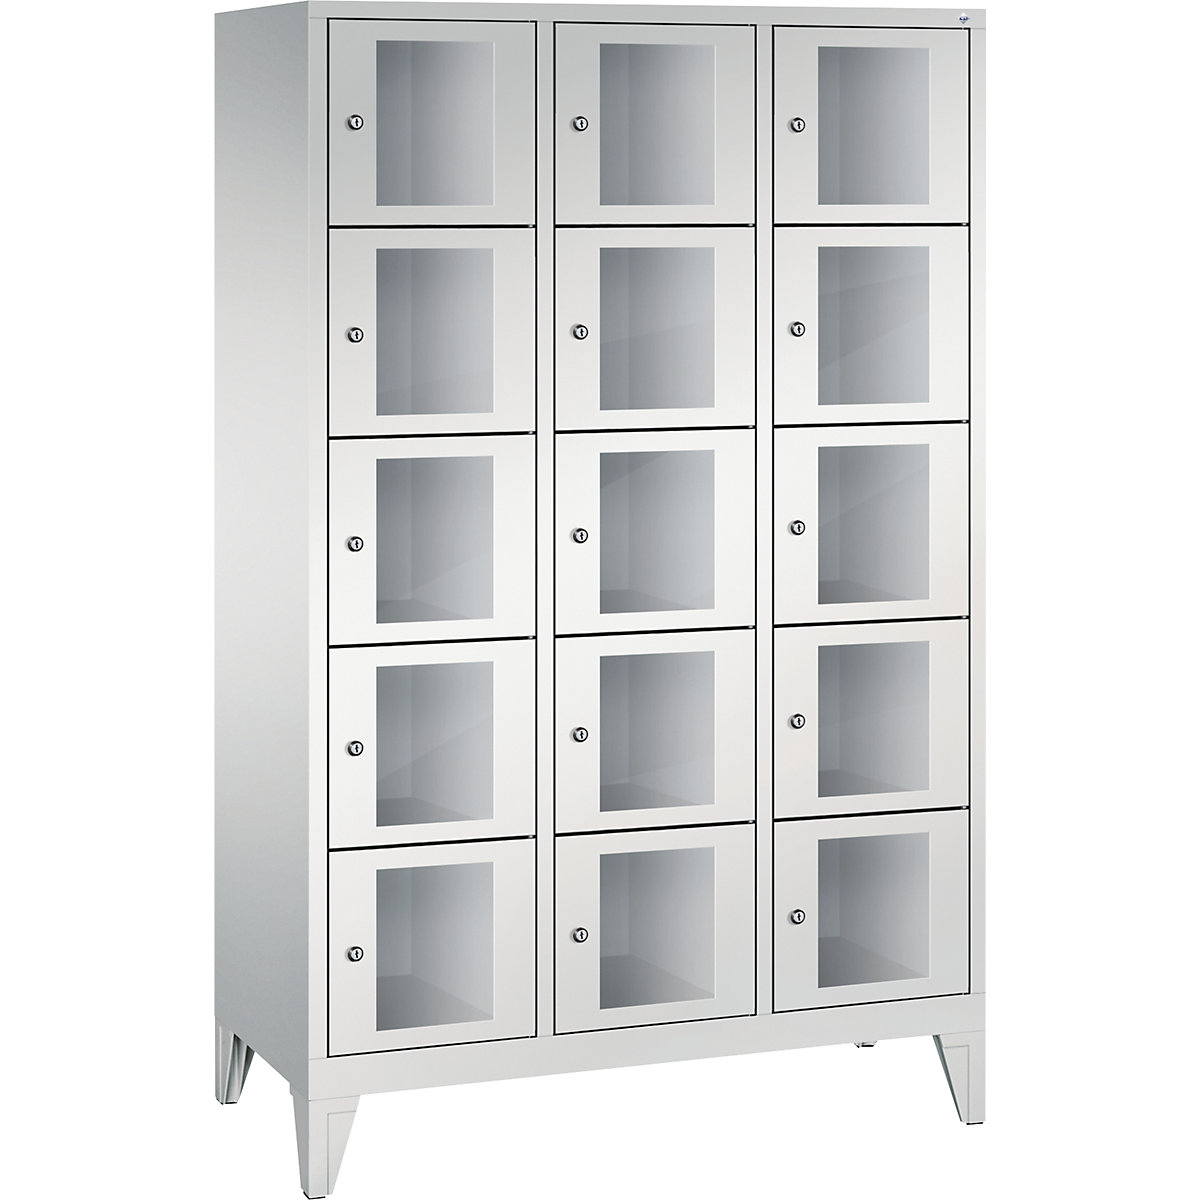 CLASSIC locker unit, compartment height 295 mm, with feet – C+P, 15 compartments, width 1200 mm, light grey door